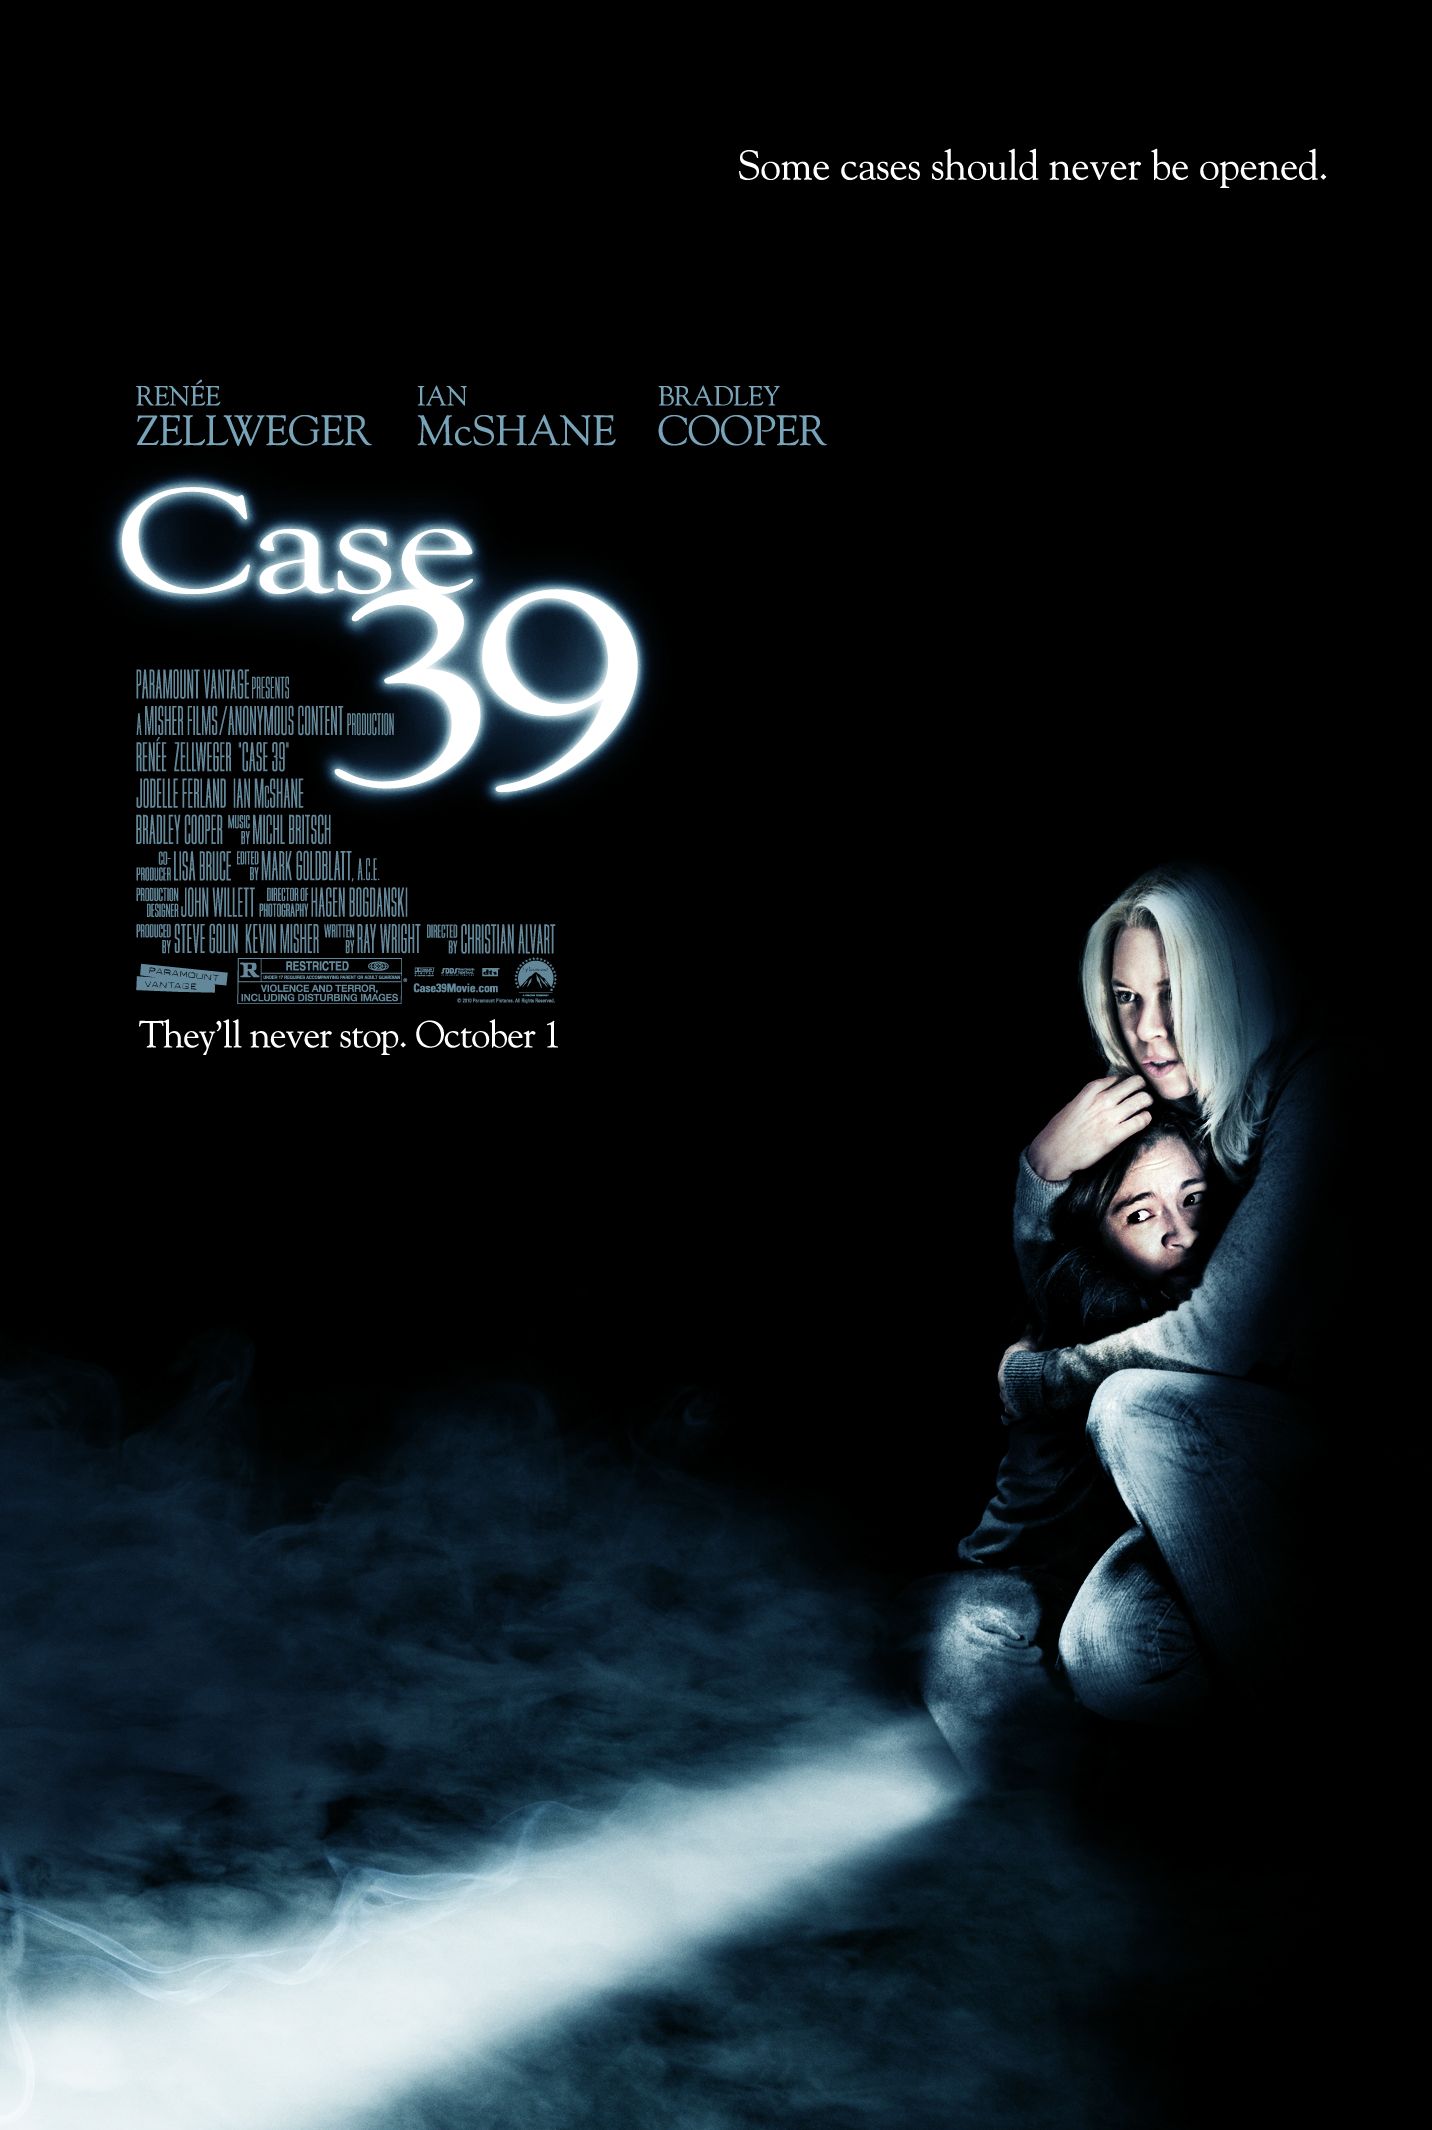 Case 39 Theatrical Poster